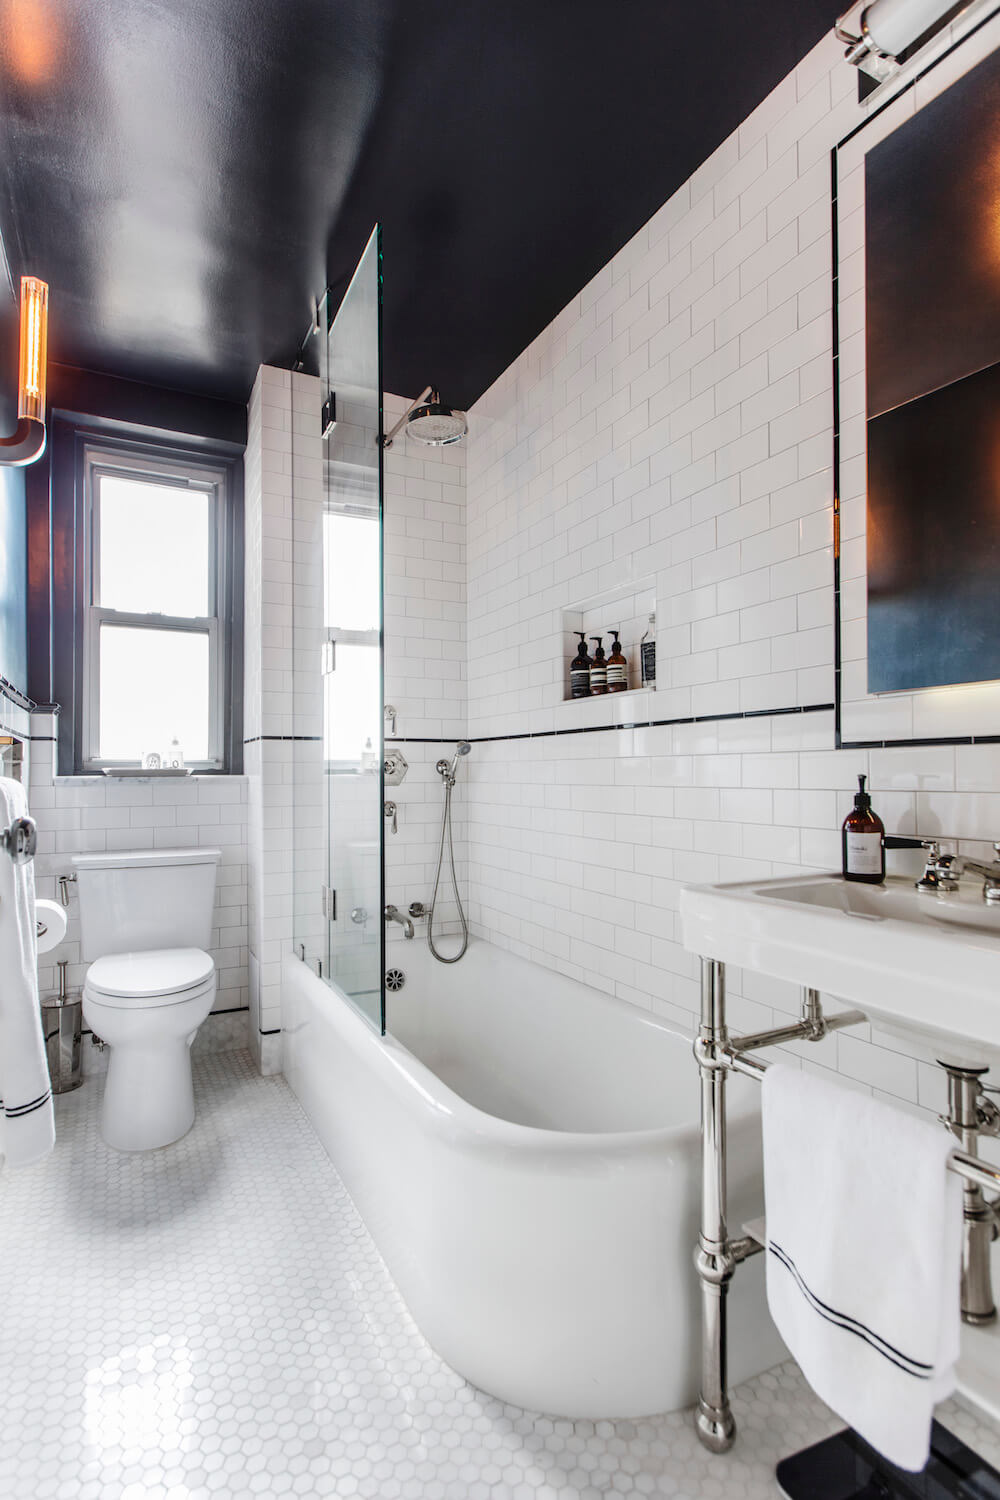 Black ceiling with white subway tiles in bathroom with white tub and shower glass and white hex floor tiles after renovation